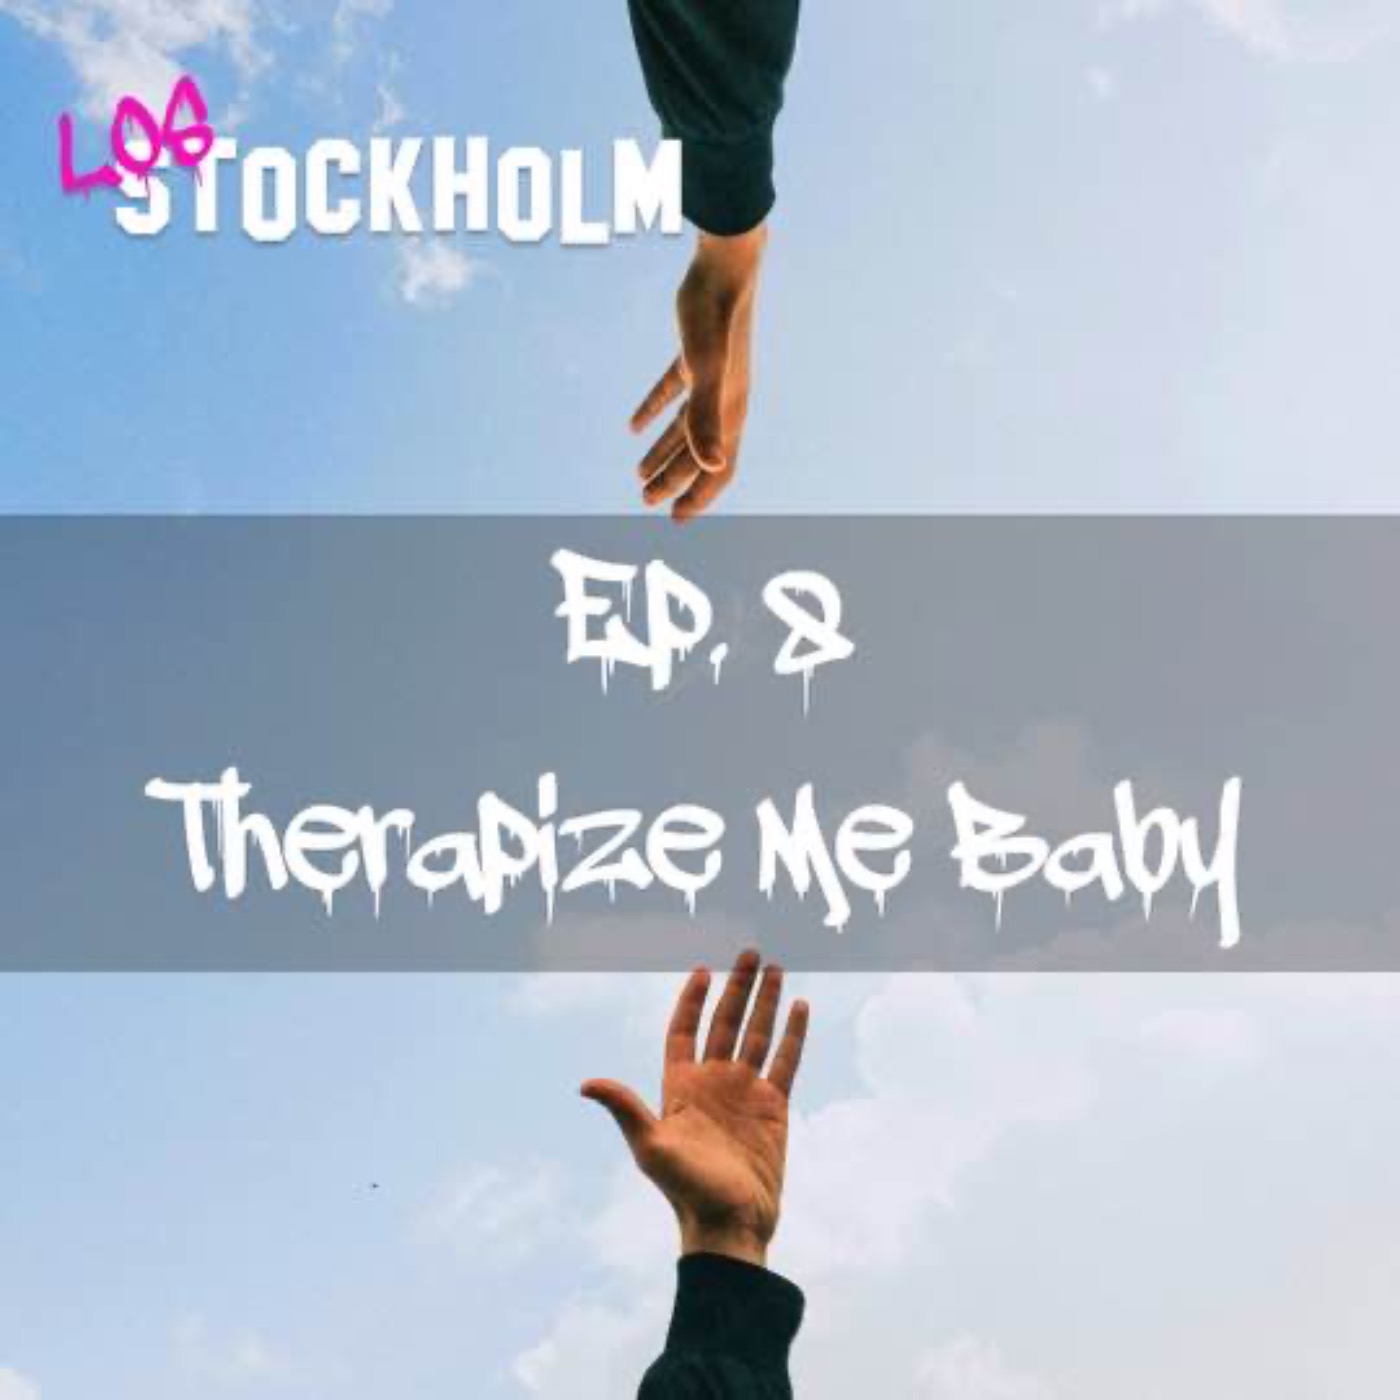 EPISODE 8: therapize me baby